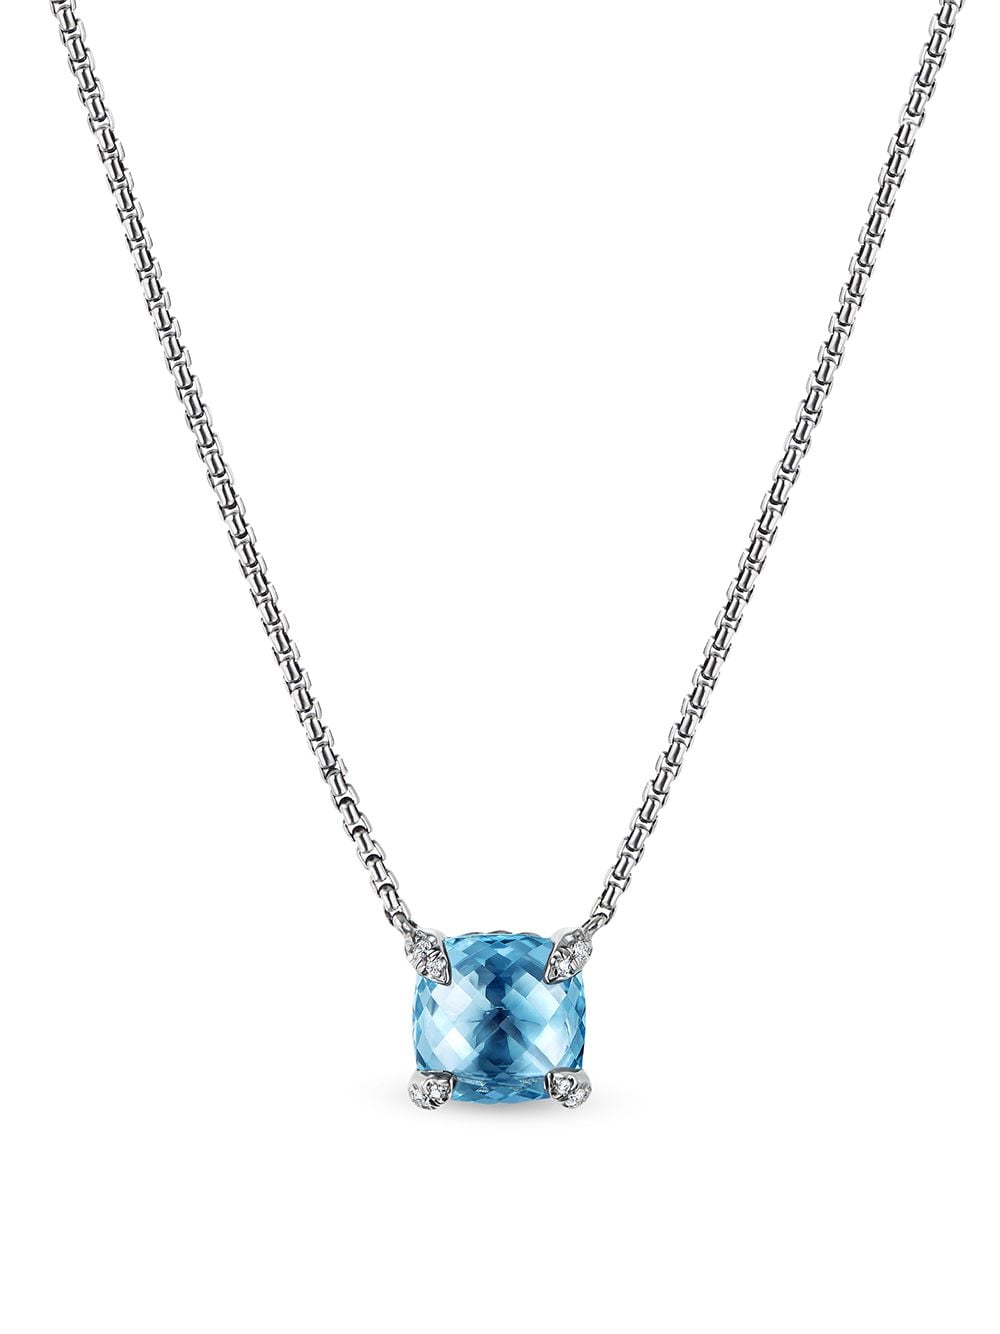 November birthstone: Topaz jewellery to shop this month (фото 2)